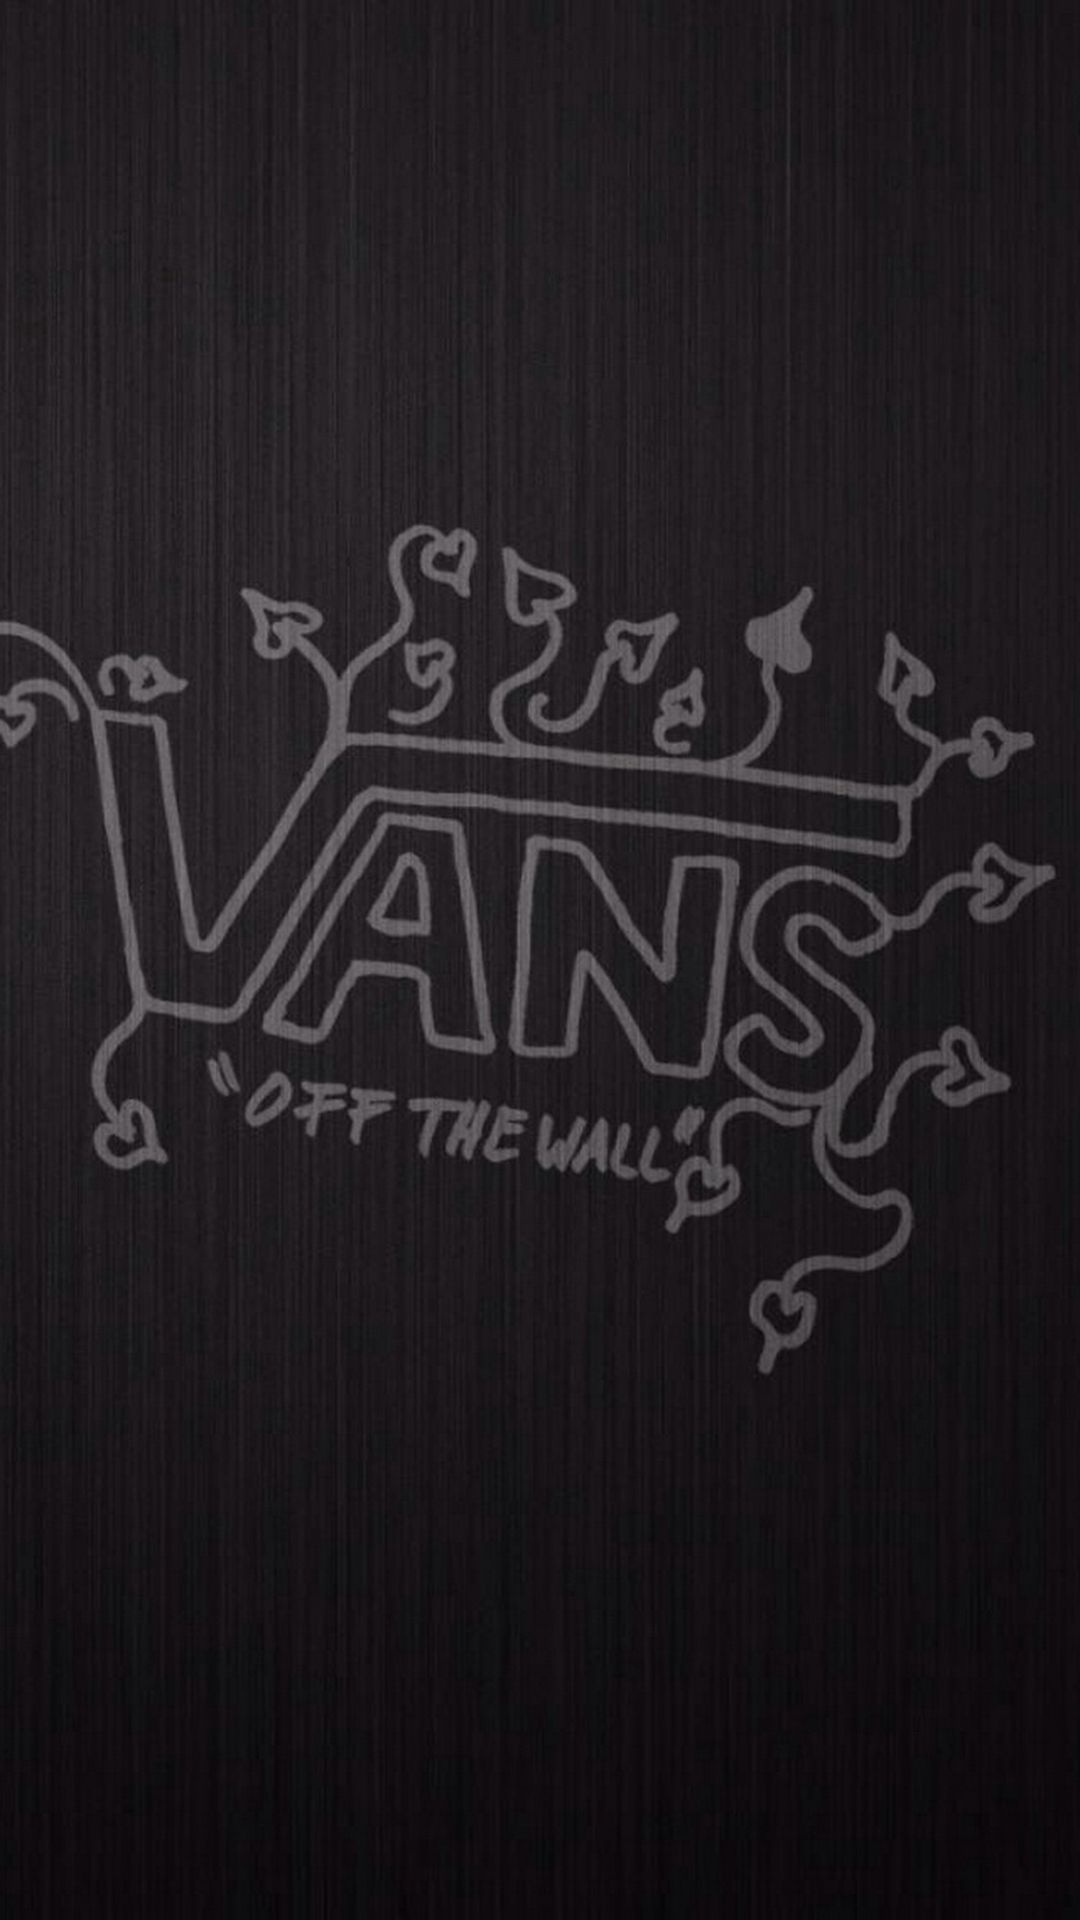 Vans: Owned by the publicly traded clothing giant, VF Corp. 1080x1920 Full HD Wallpaper.